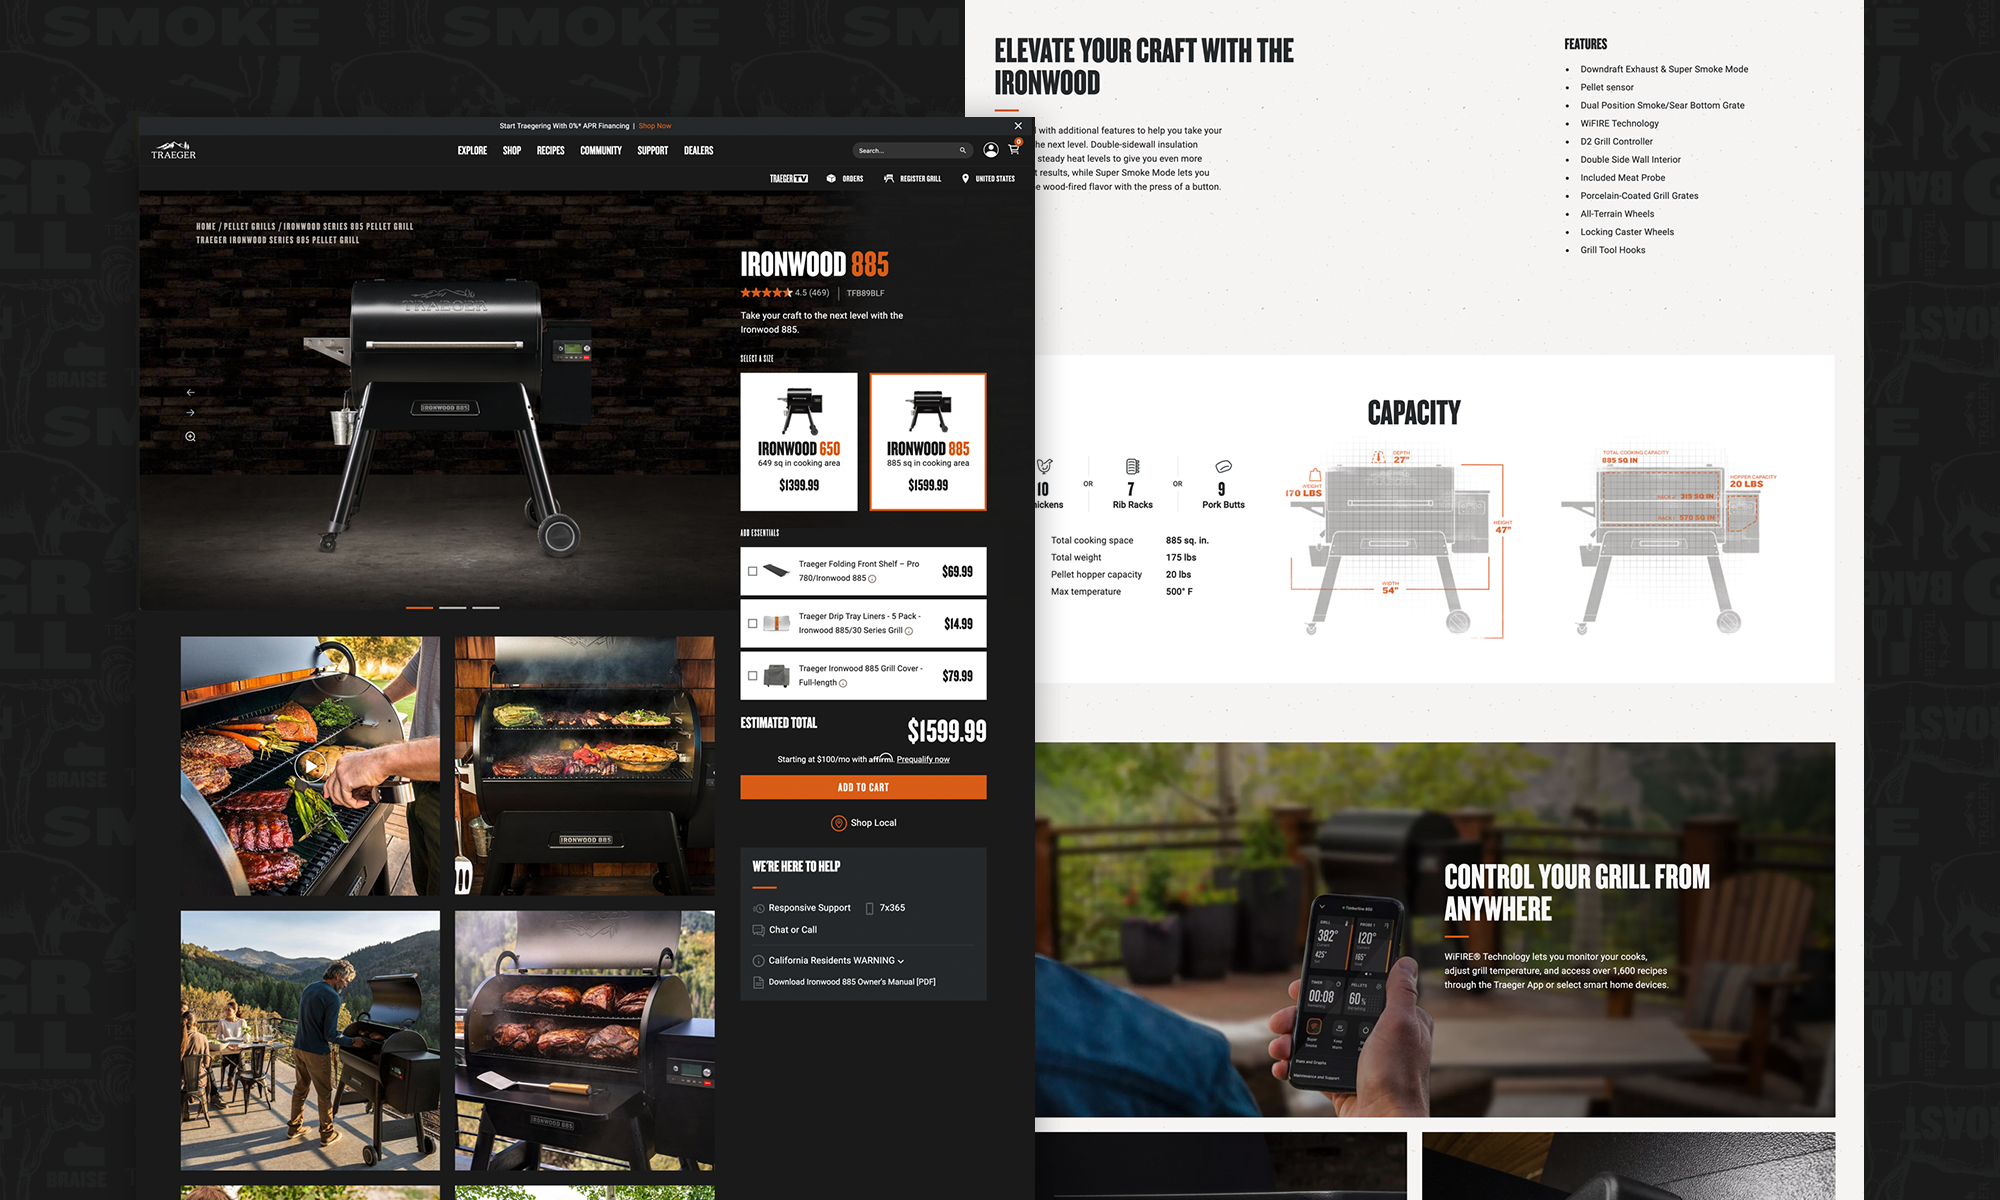 Traeger Product Detail Page Design